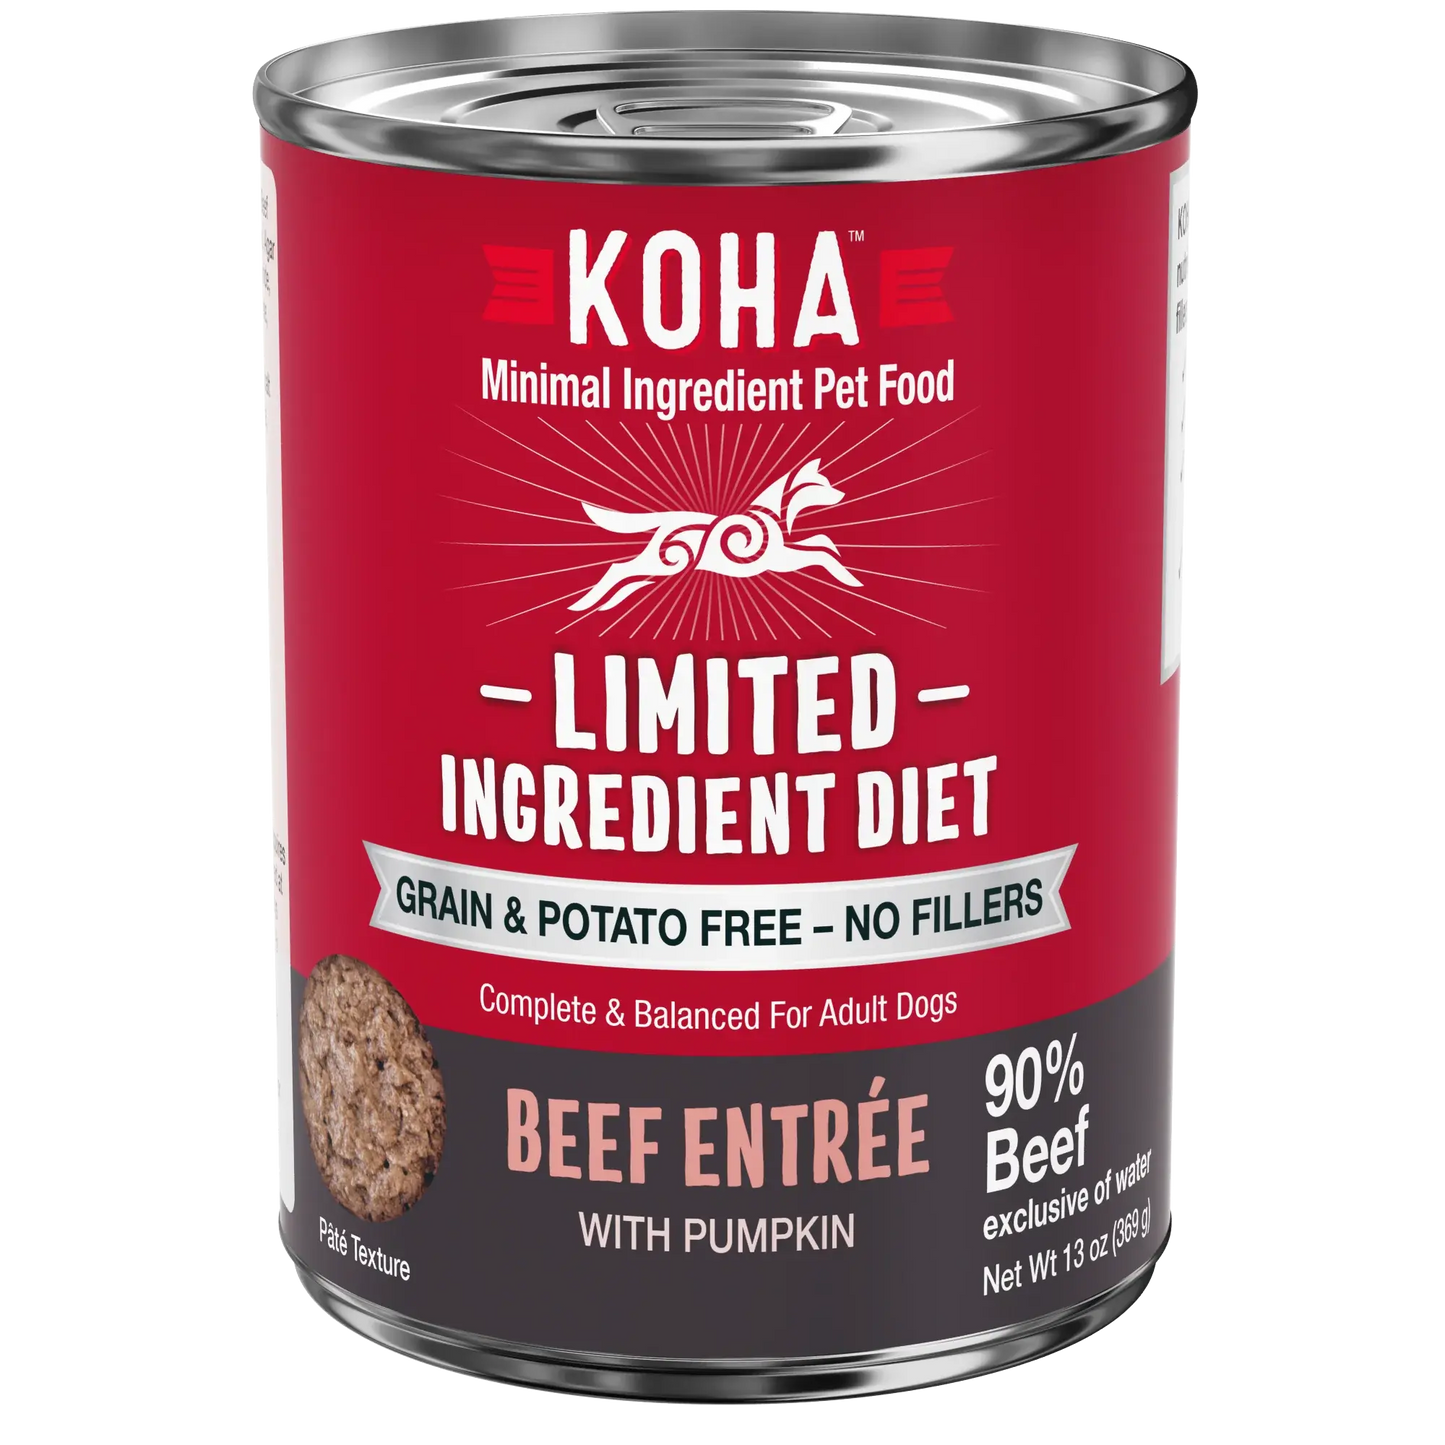 KOHA Limited Ingredient Diet Beef Entrée for Dogs 13oz Cans Case of 12 KOHA